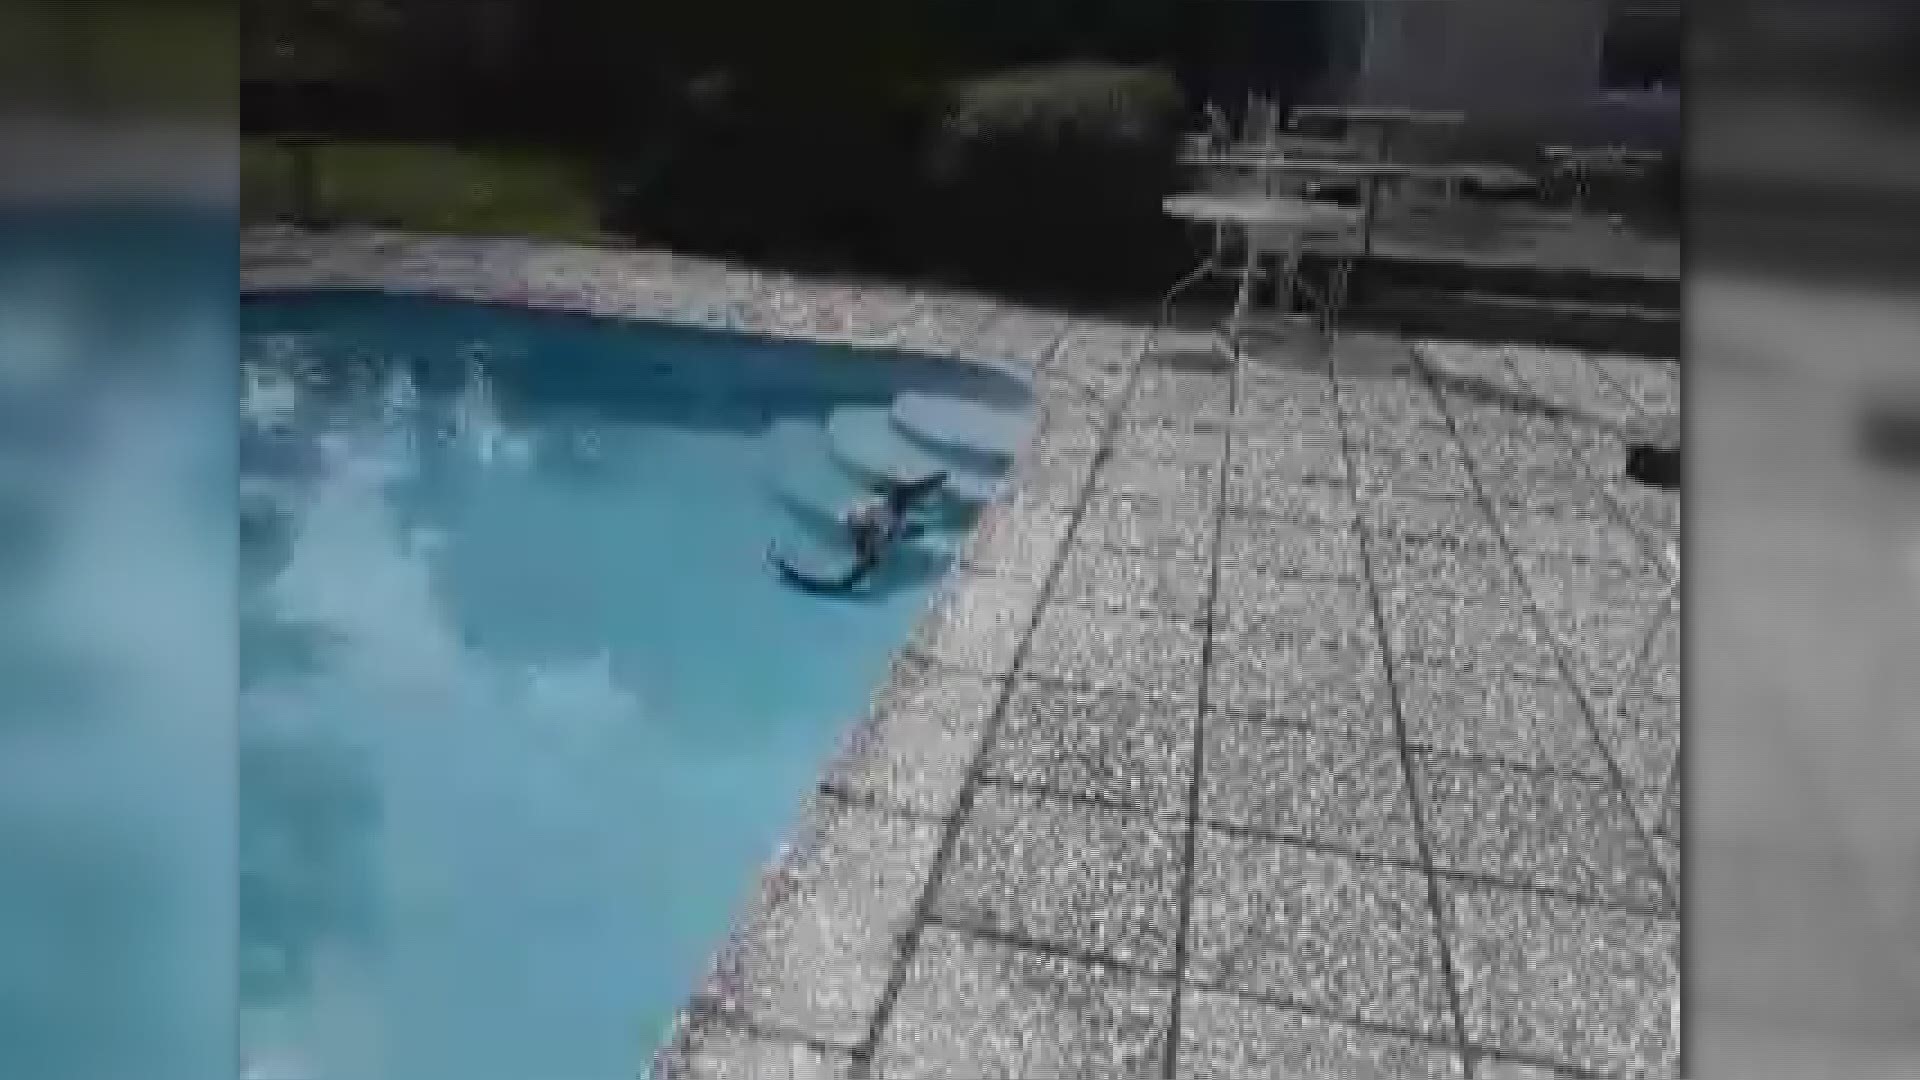 While servicing a swimming pool in St. Simons Island a tech found a gator swimming in a customer's pool.